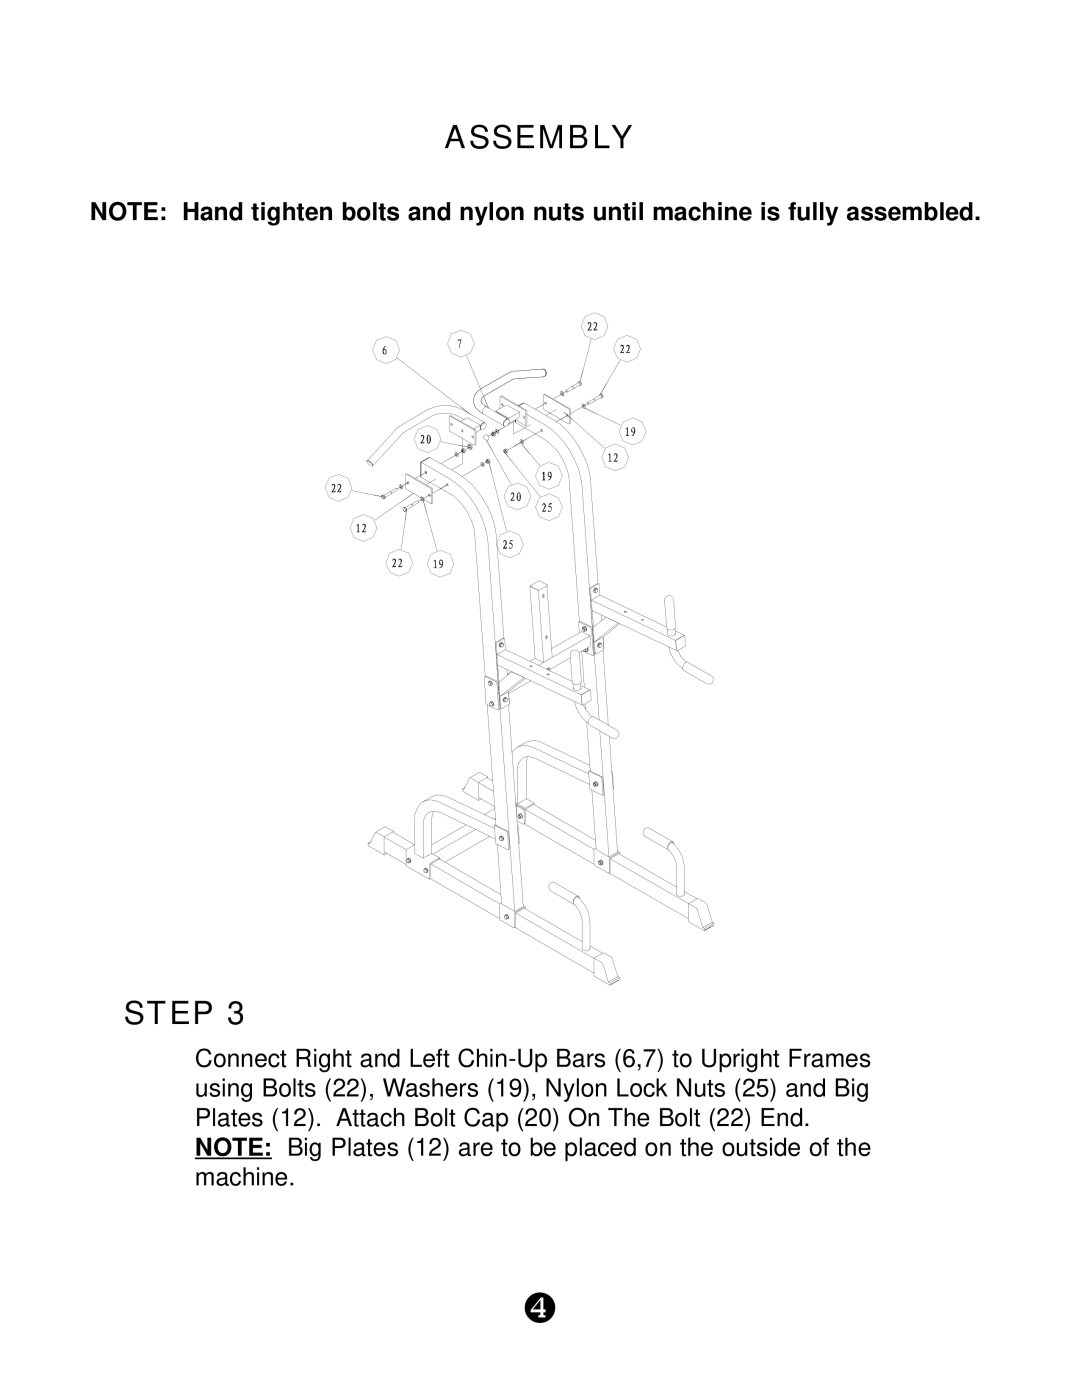 Keys Fitness KPS-PT manual Assembly, Step, NOTE Big Plates 12 are to be placed on the outside of the machine 